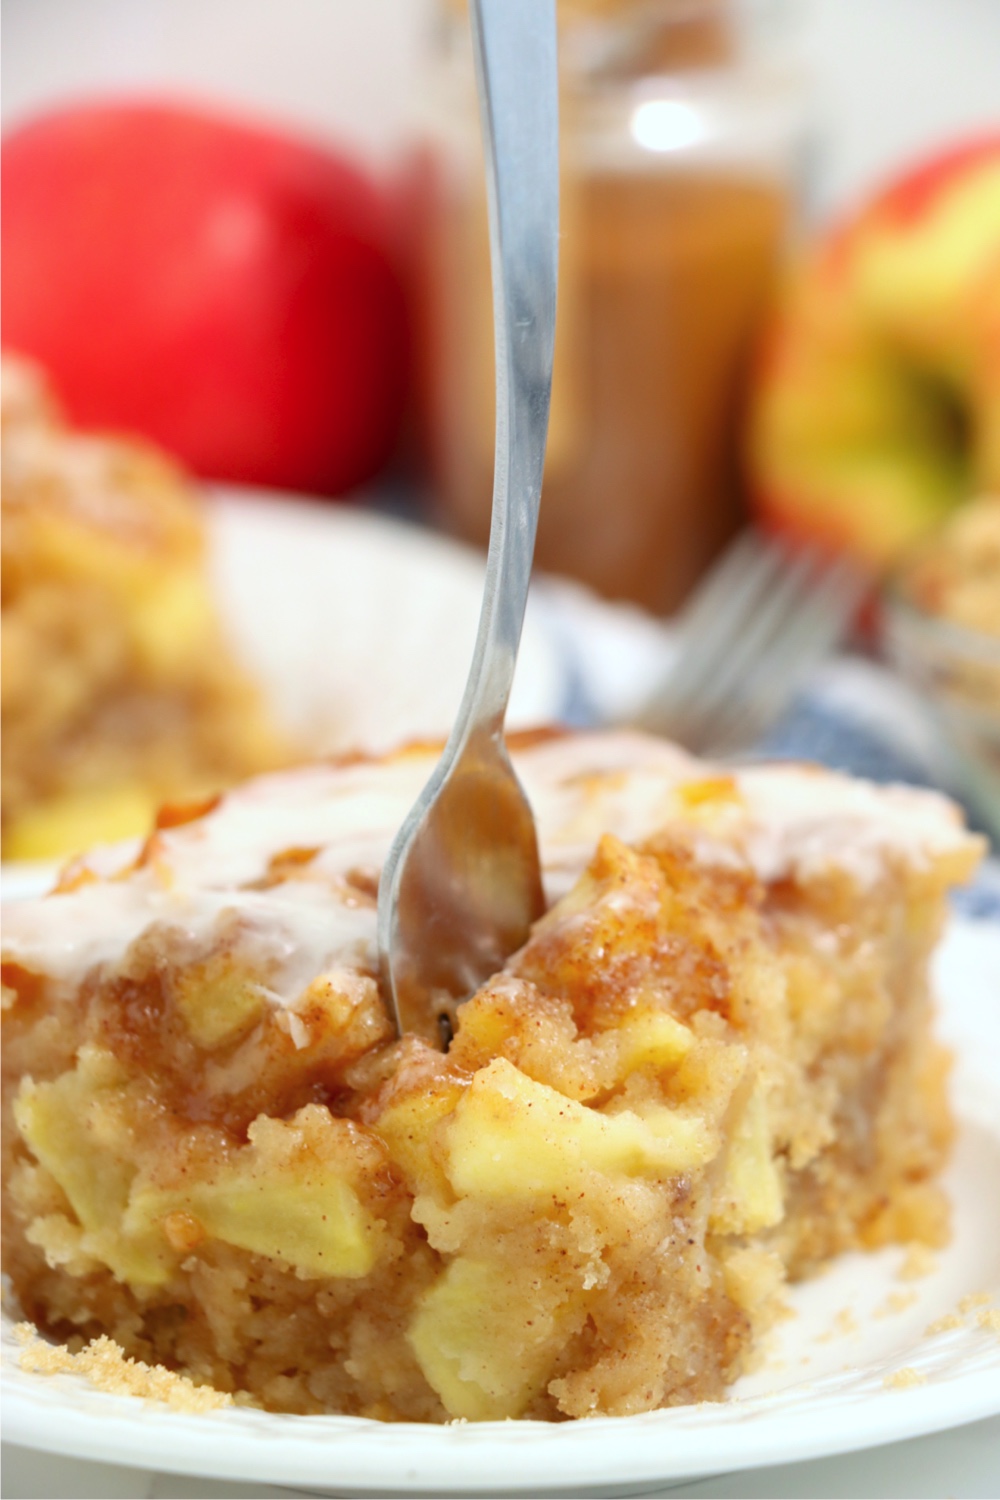 fork digging into piece of apple cake